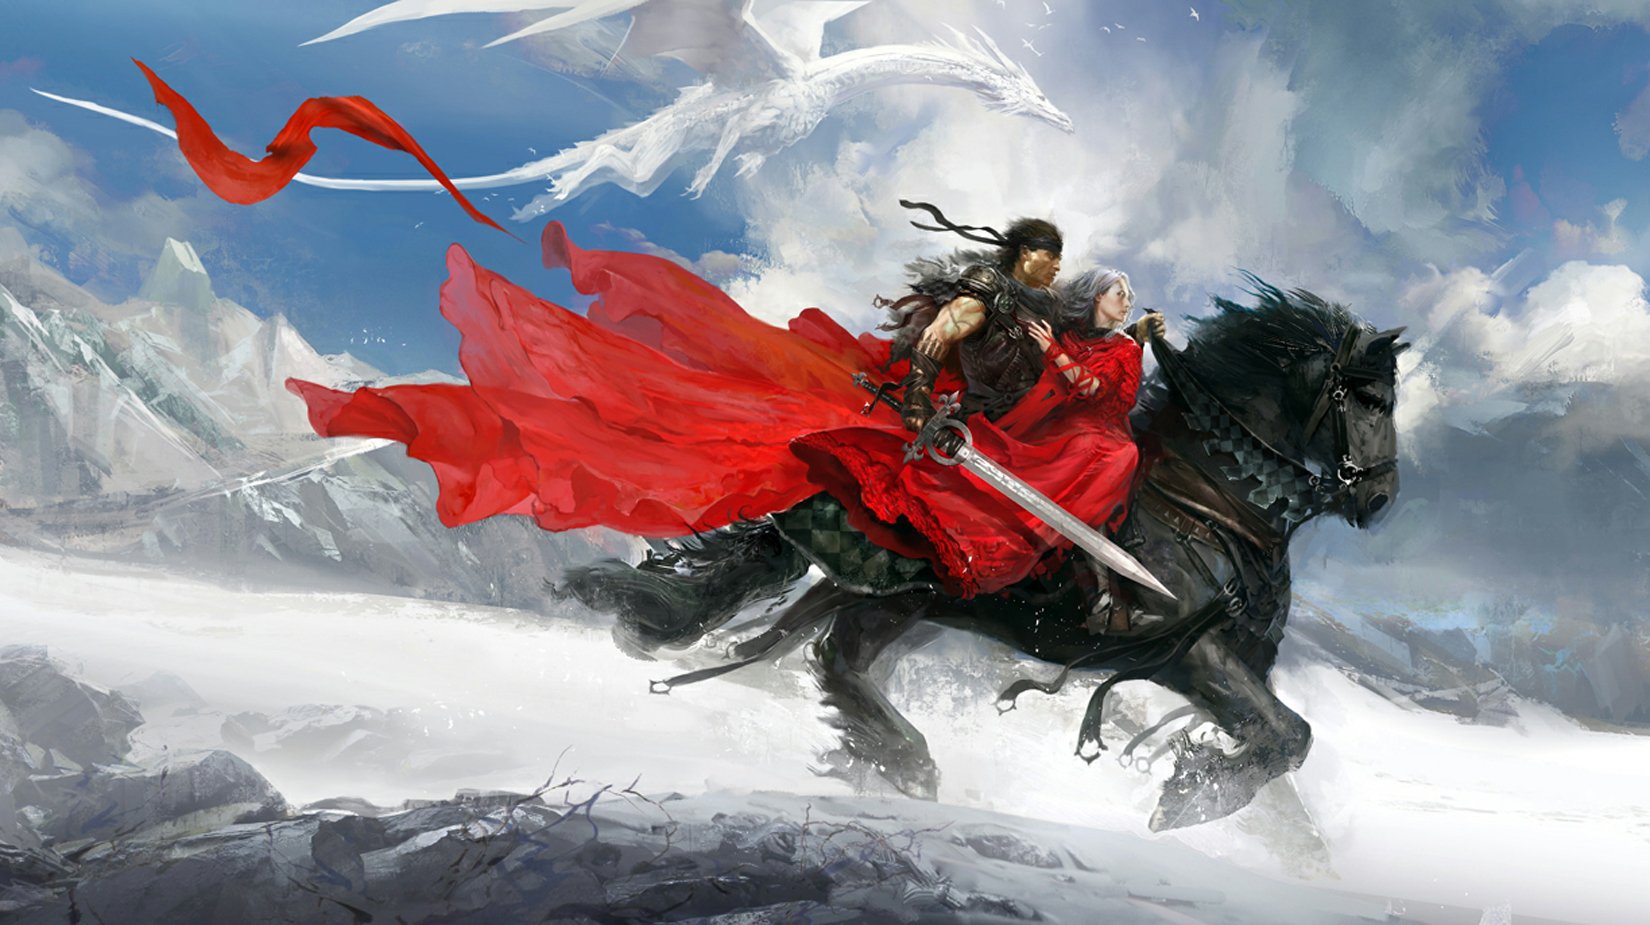 fantasy, Painting, Sword, Dragon, Ice, Snow, Red, Princes, Horse, Mountain Wallpaper